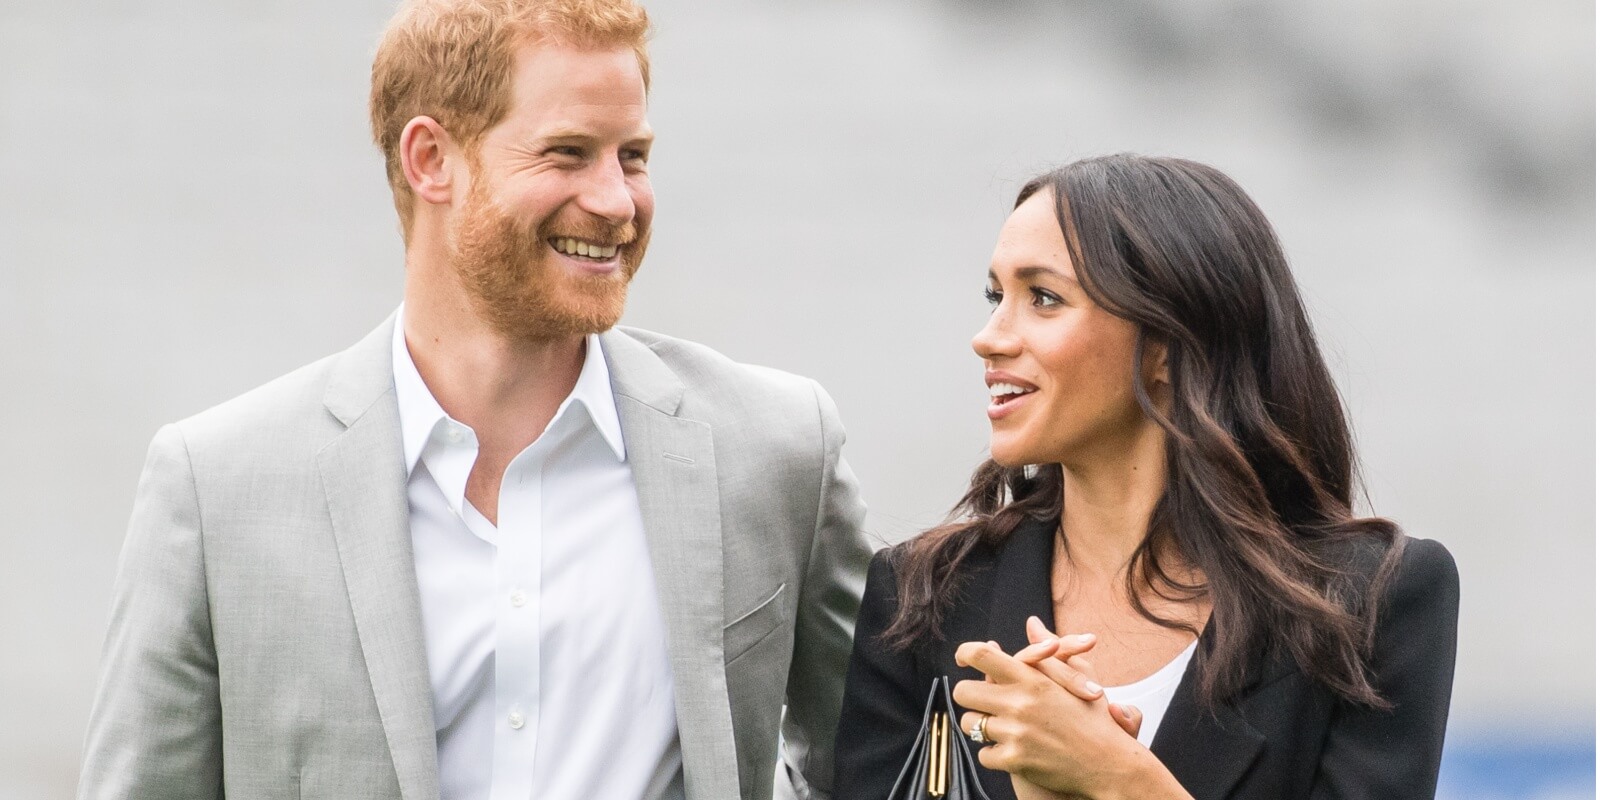 Prince Harry and Meghan Markle are photographed during a press call in 2018.